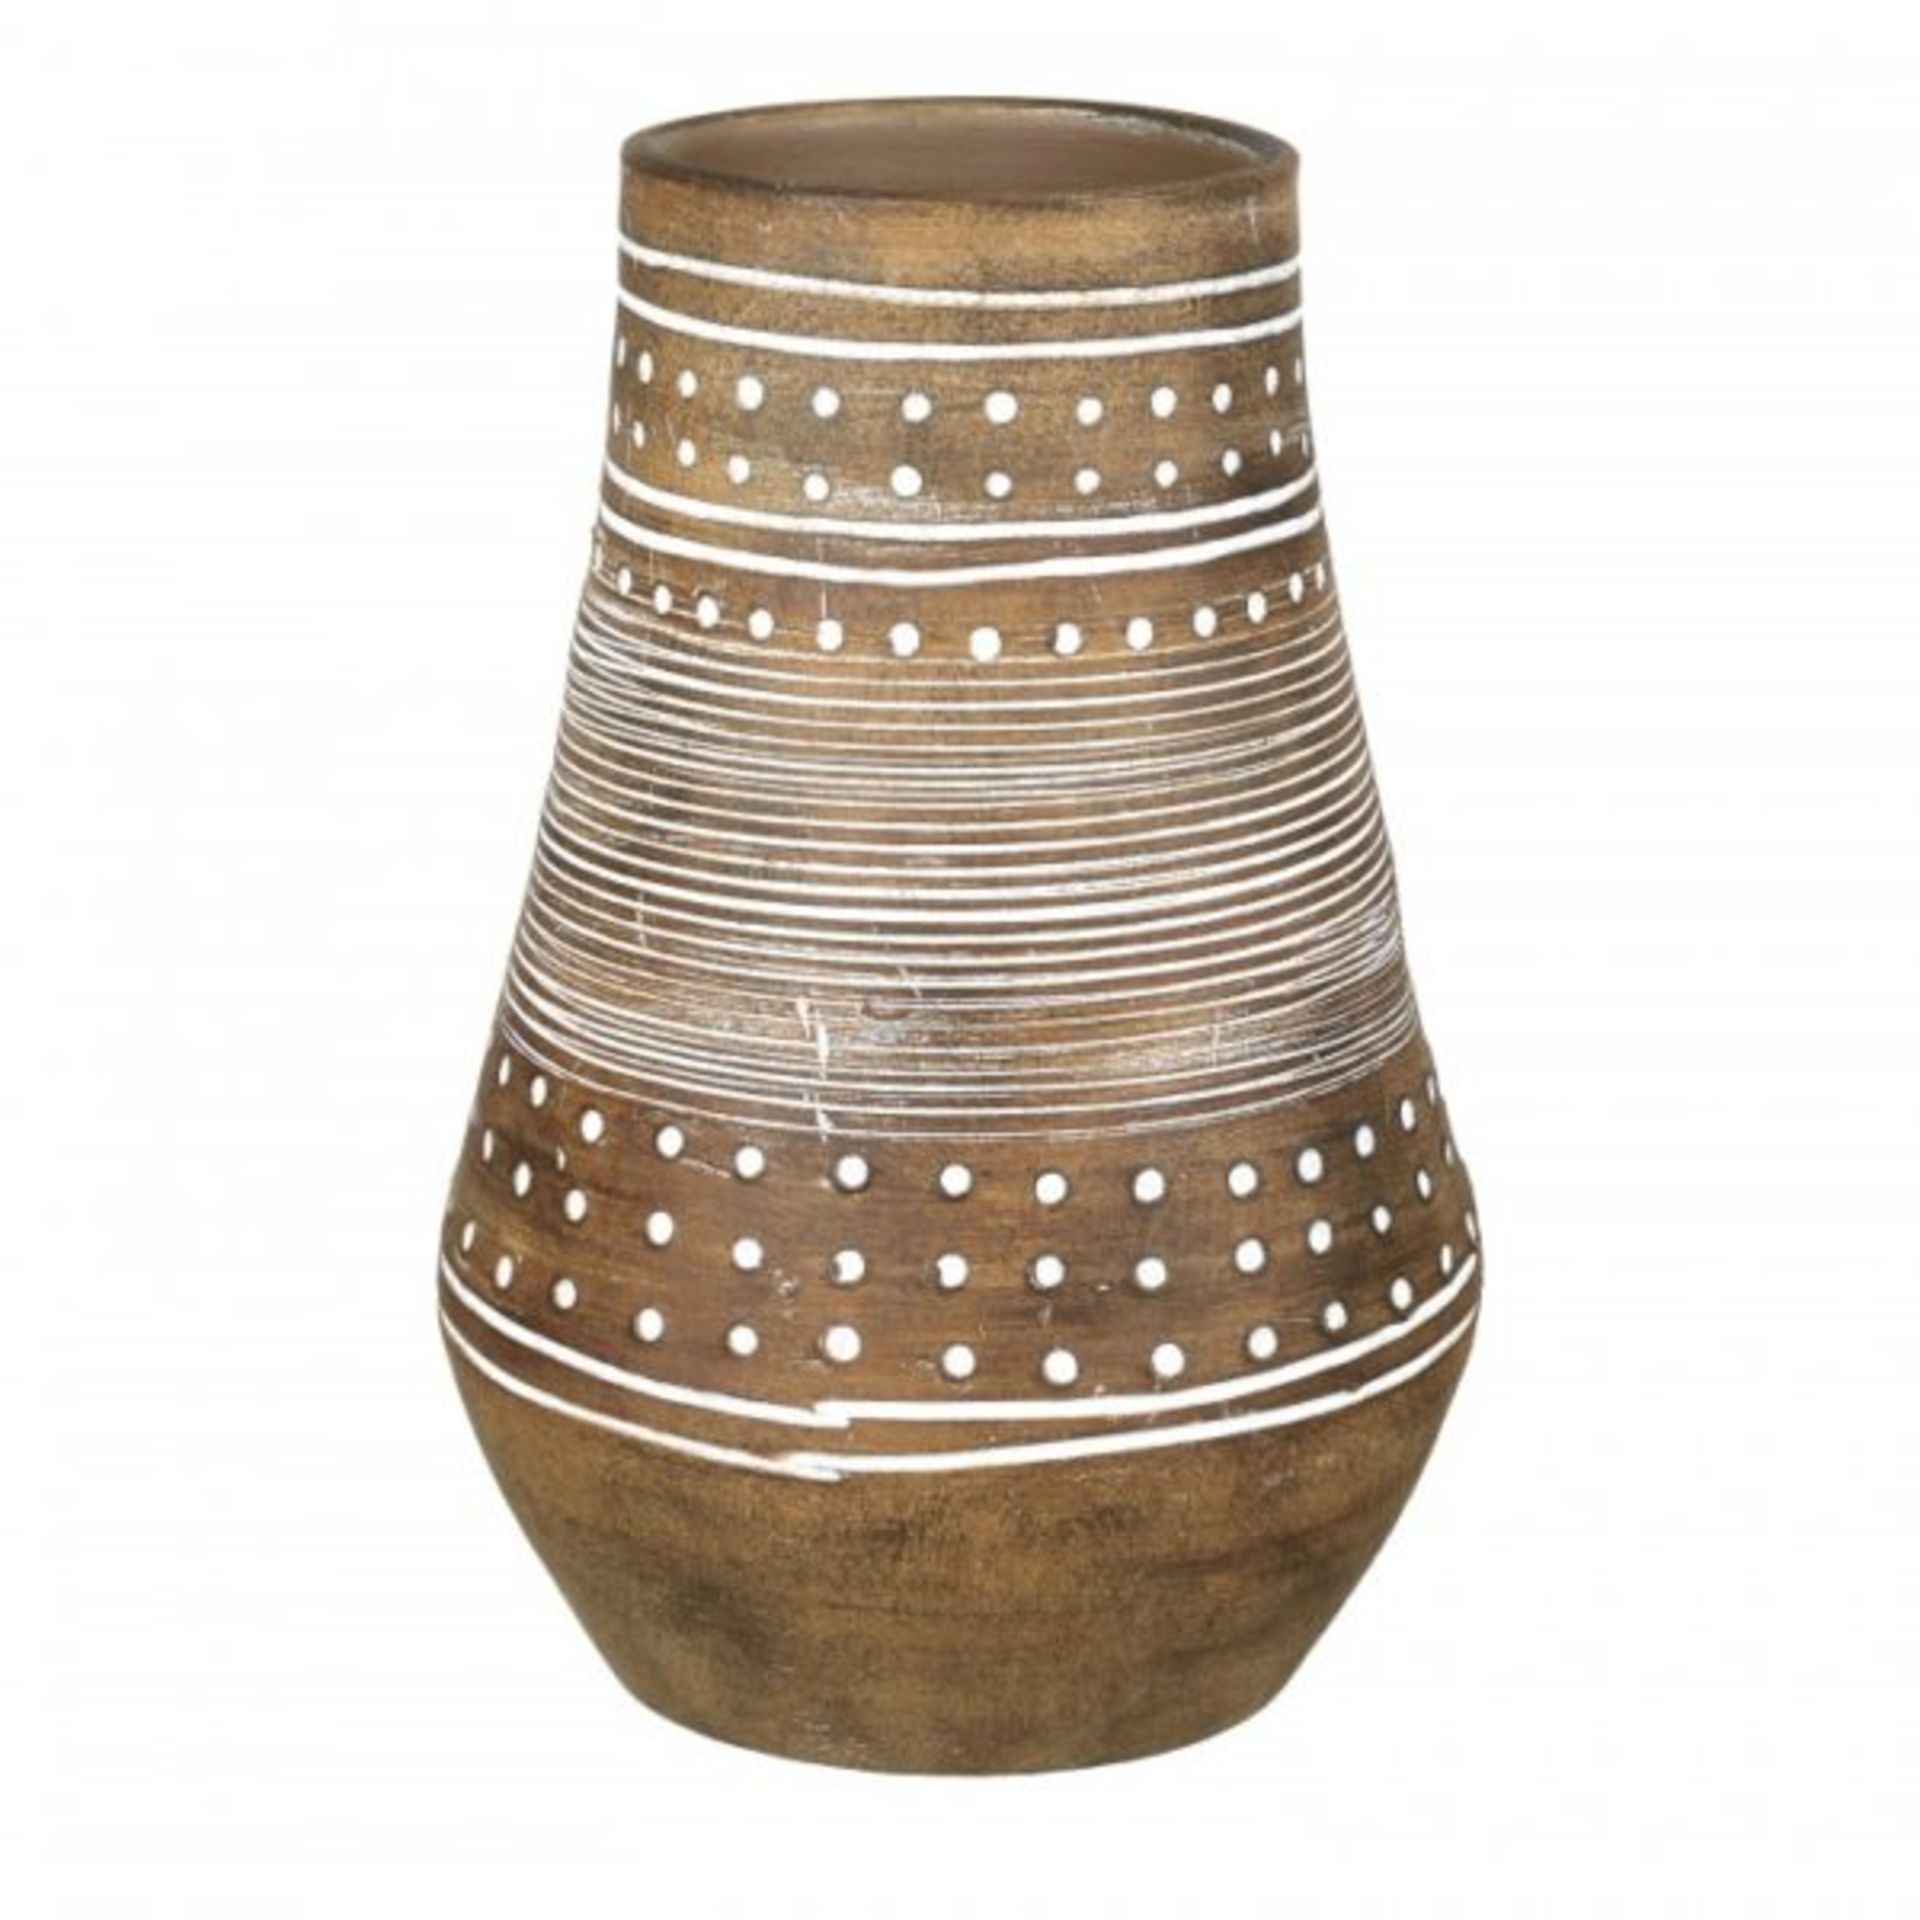 Clanfield Vase Terracotta Russet and White 270x405mmh Brand New Parlane Accessories We take our